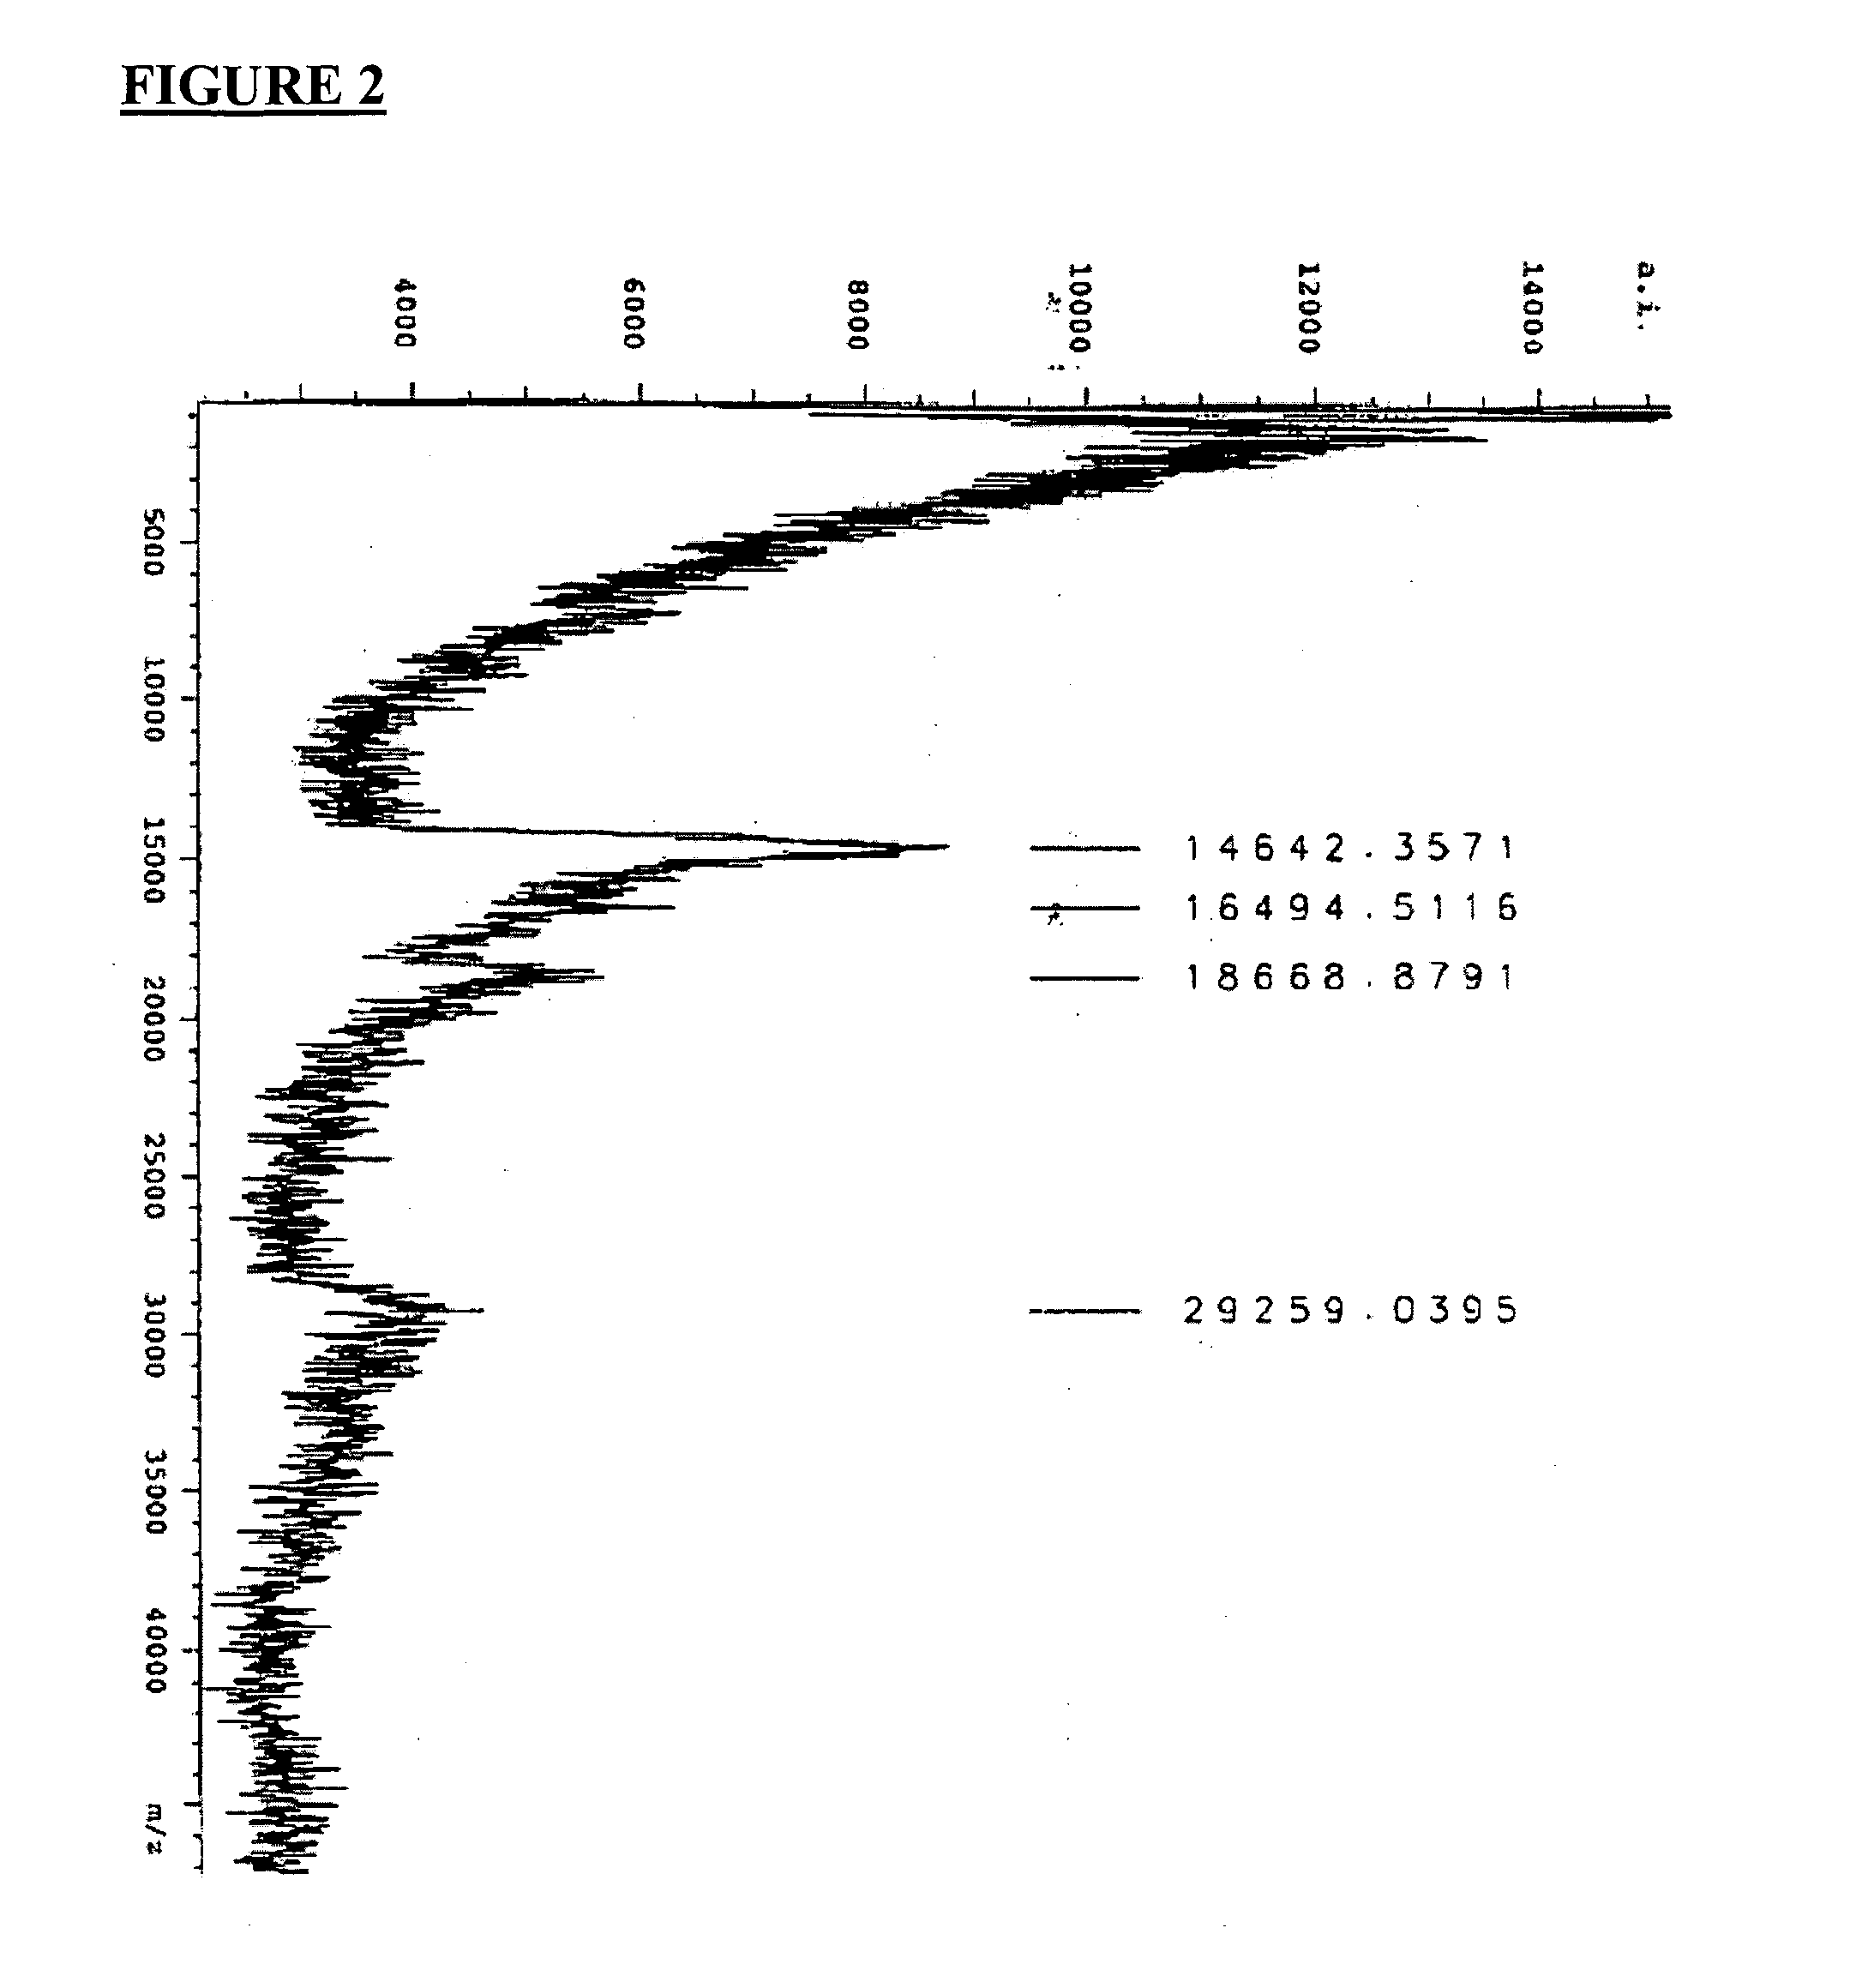 Immunodynamic complexes and methods for using and preparing such complexes